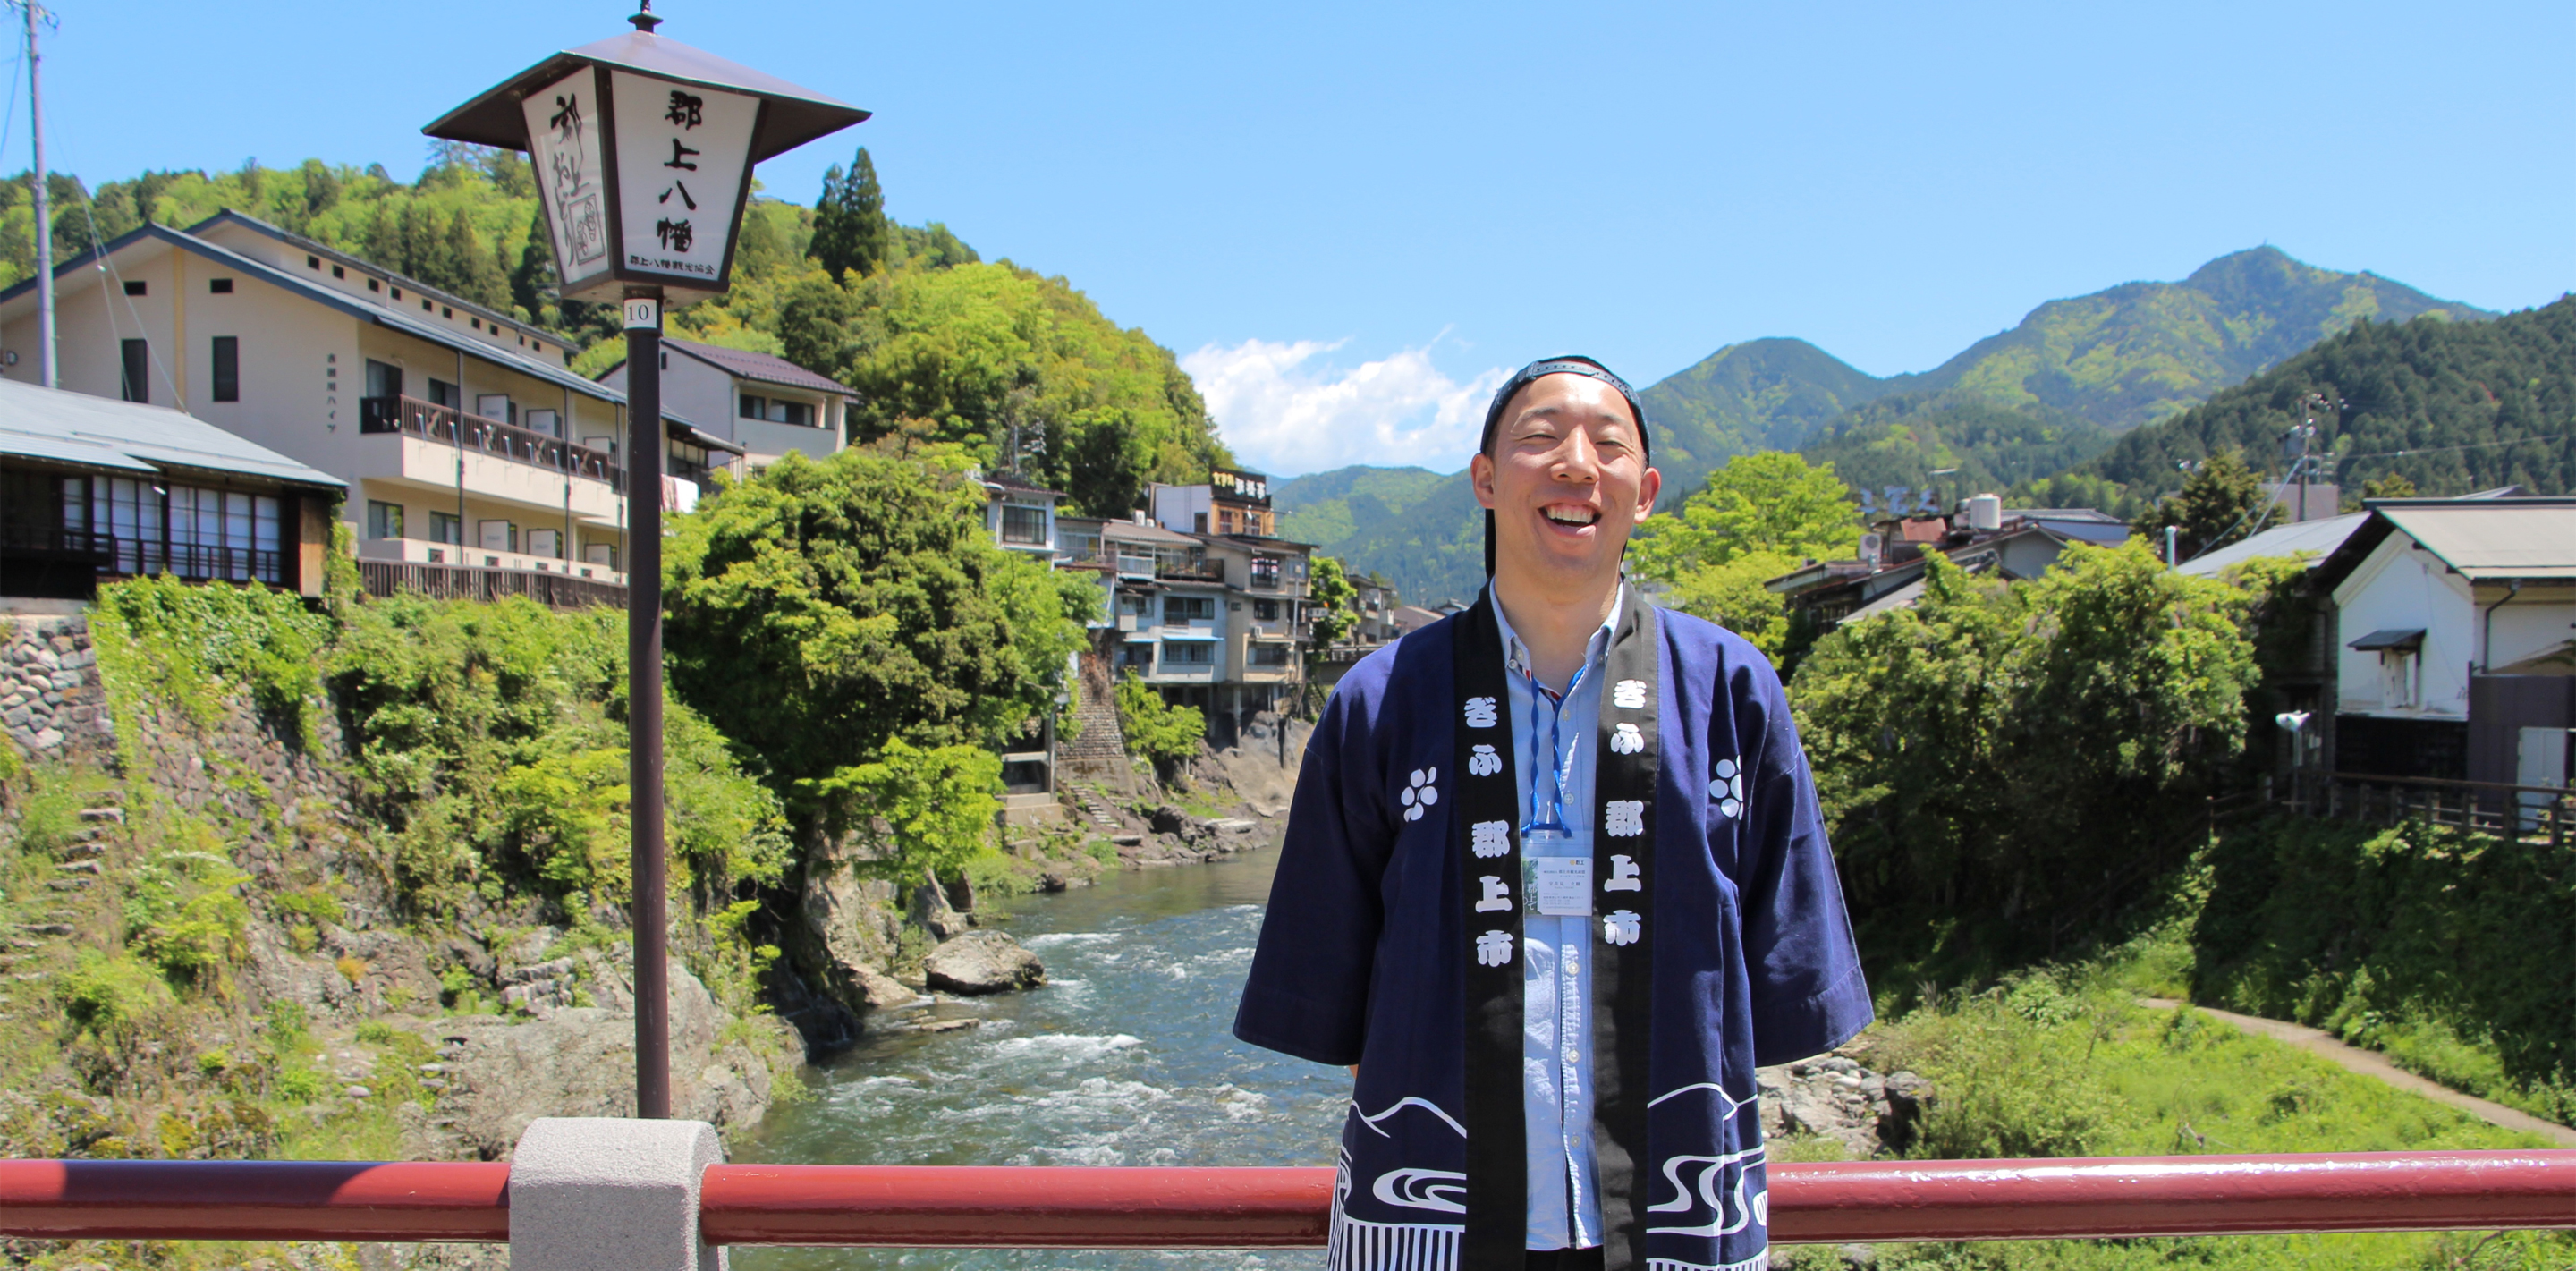 Sightseeing base with old buildings and Gujo Hachiman tourist guide